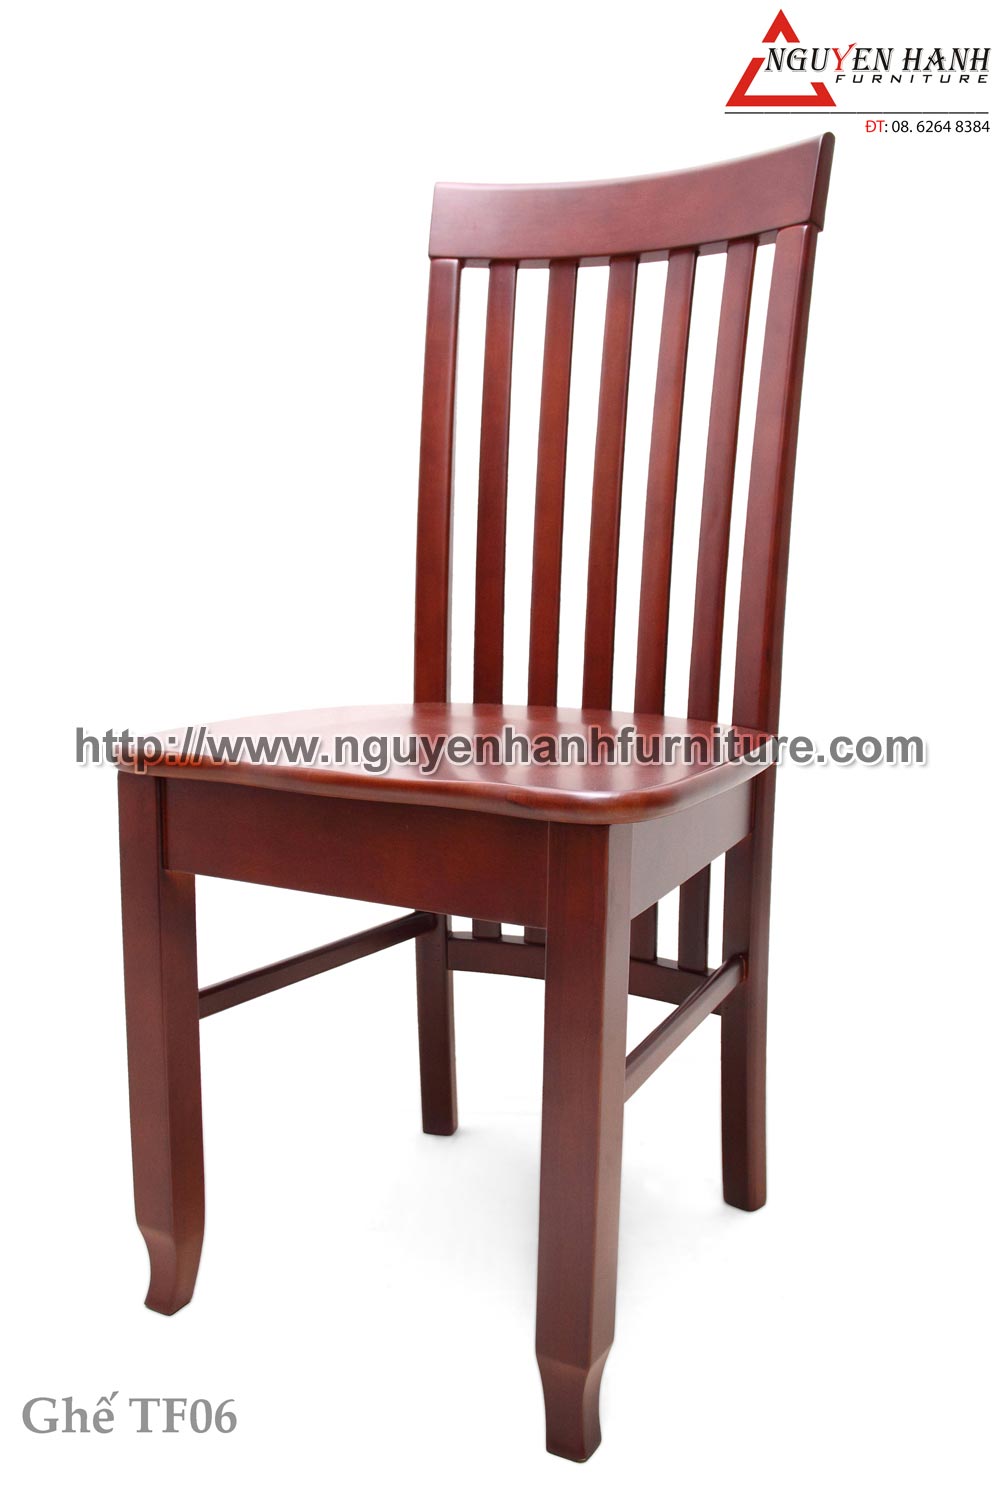 Name product: TF06 chair 